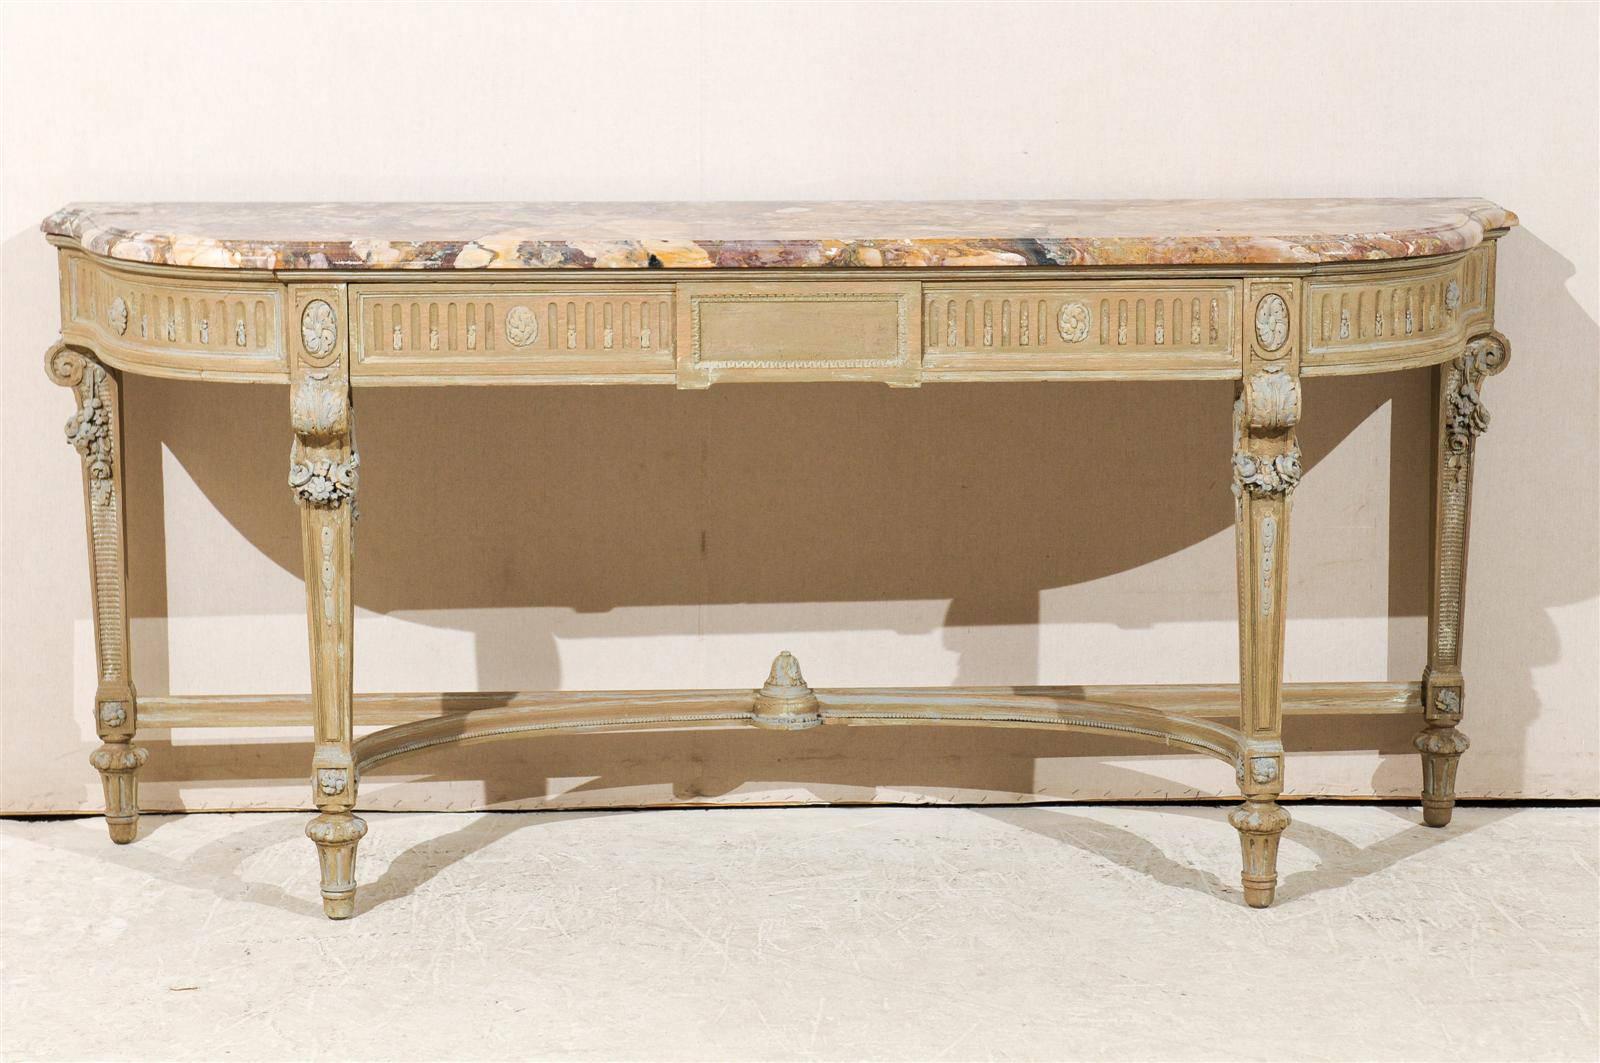 A French early 19th century wooden console table with marble top, painted accents, single dovetailed drawer with multiple separations, wonderful floral carving, volutes under the skirt, tapered legs over short fluted feet and half-moon cross